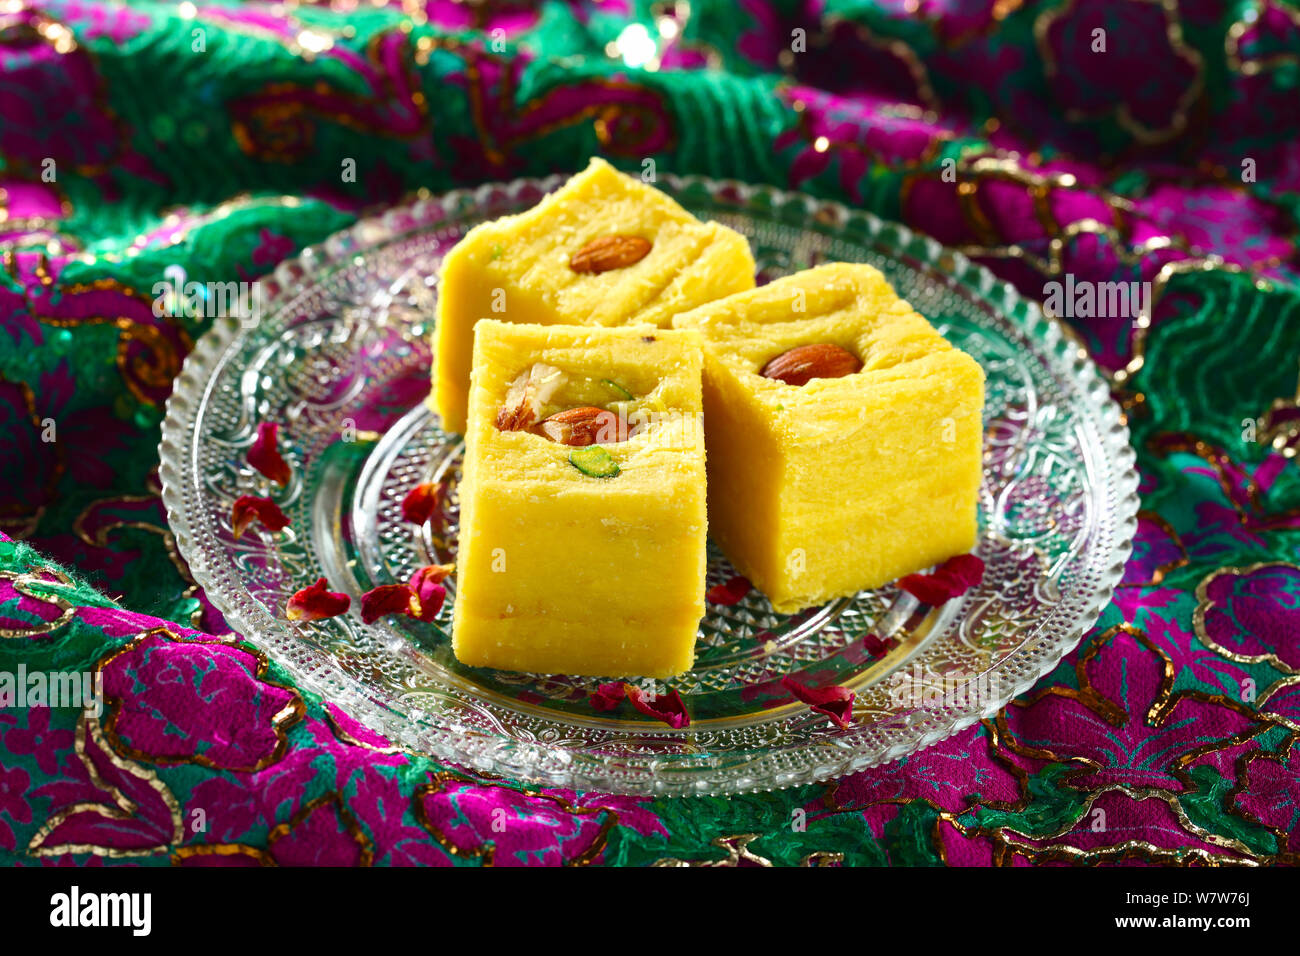 Soan papdi served in a plate Stock Photo